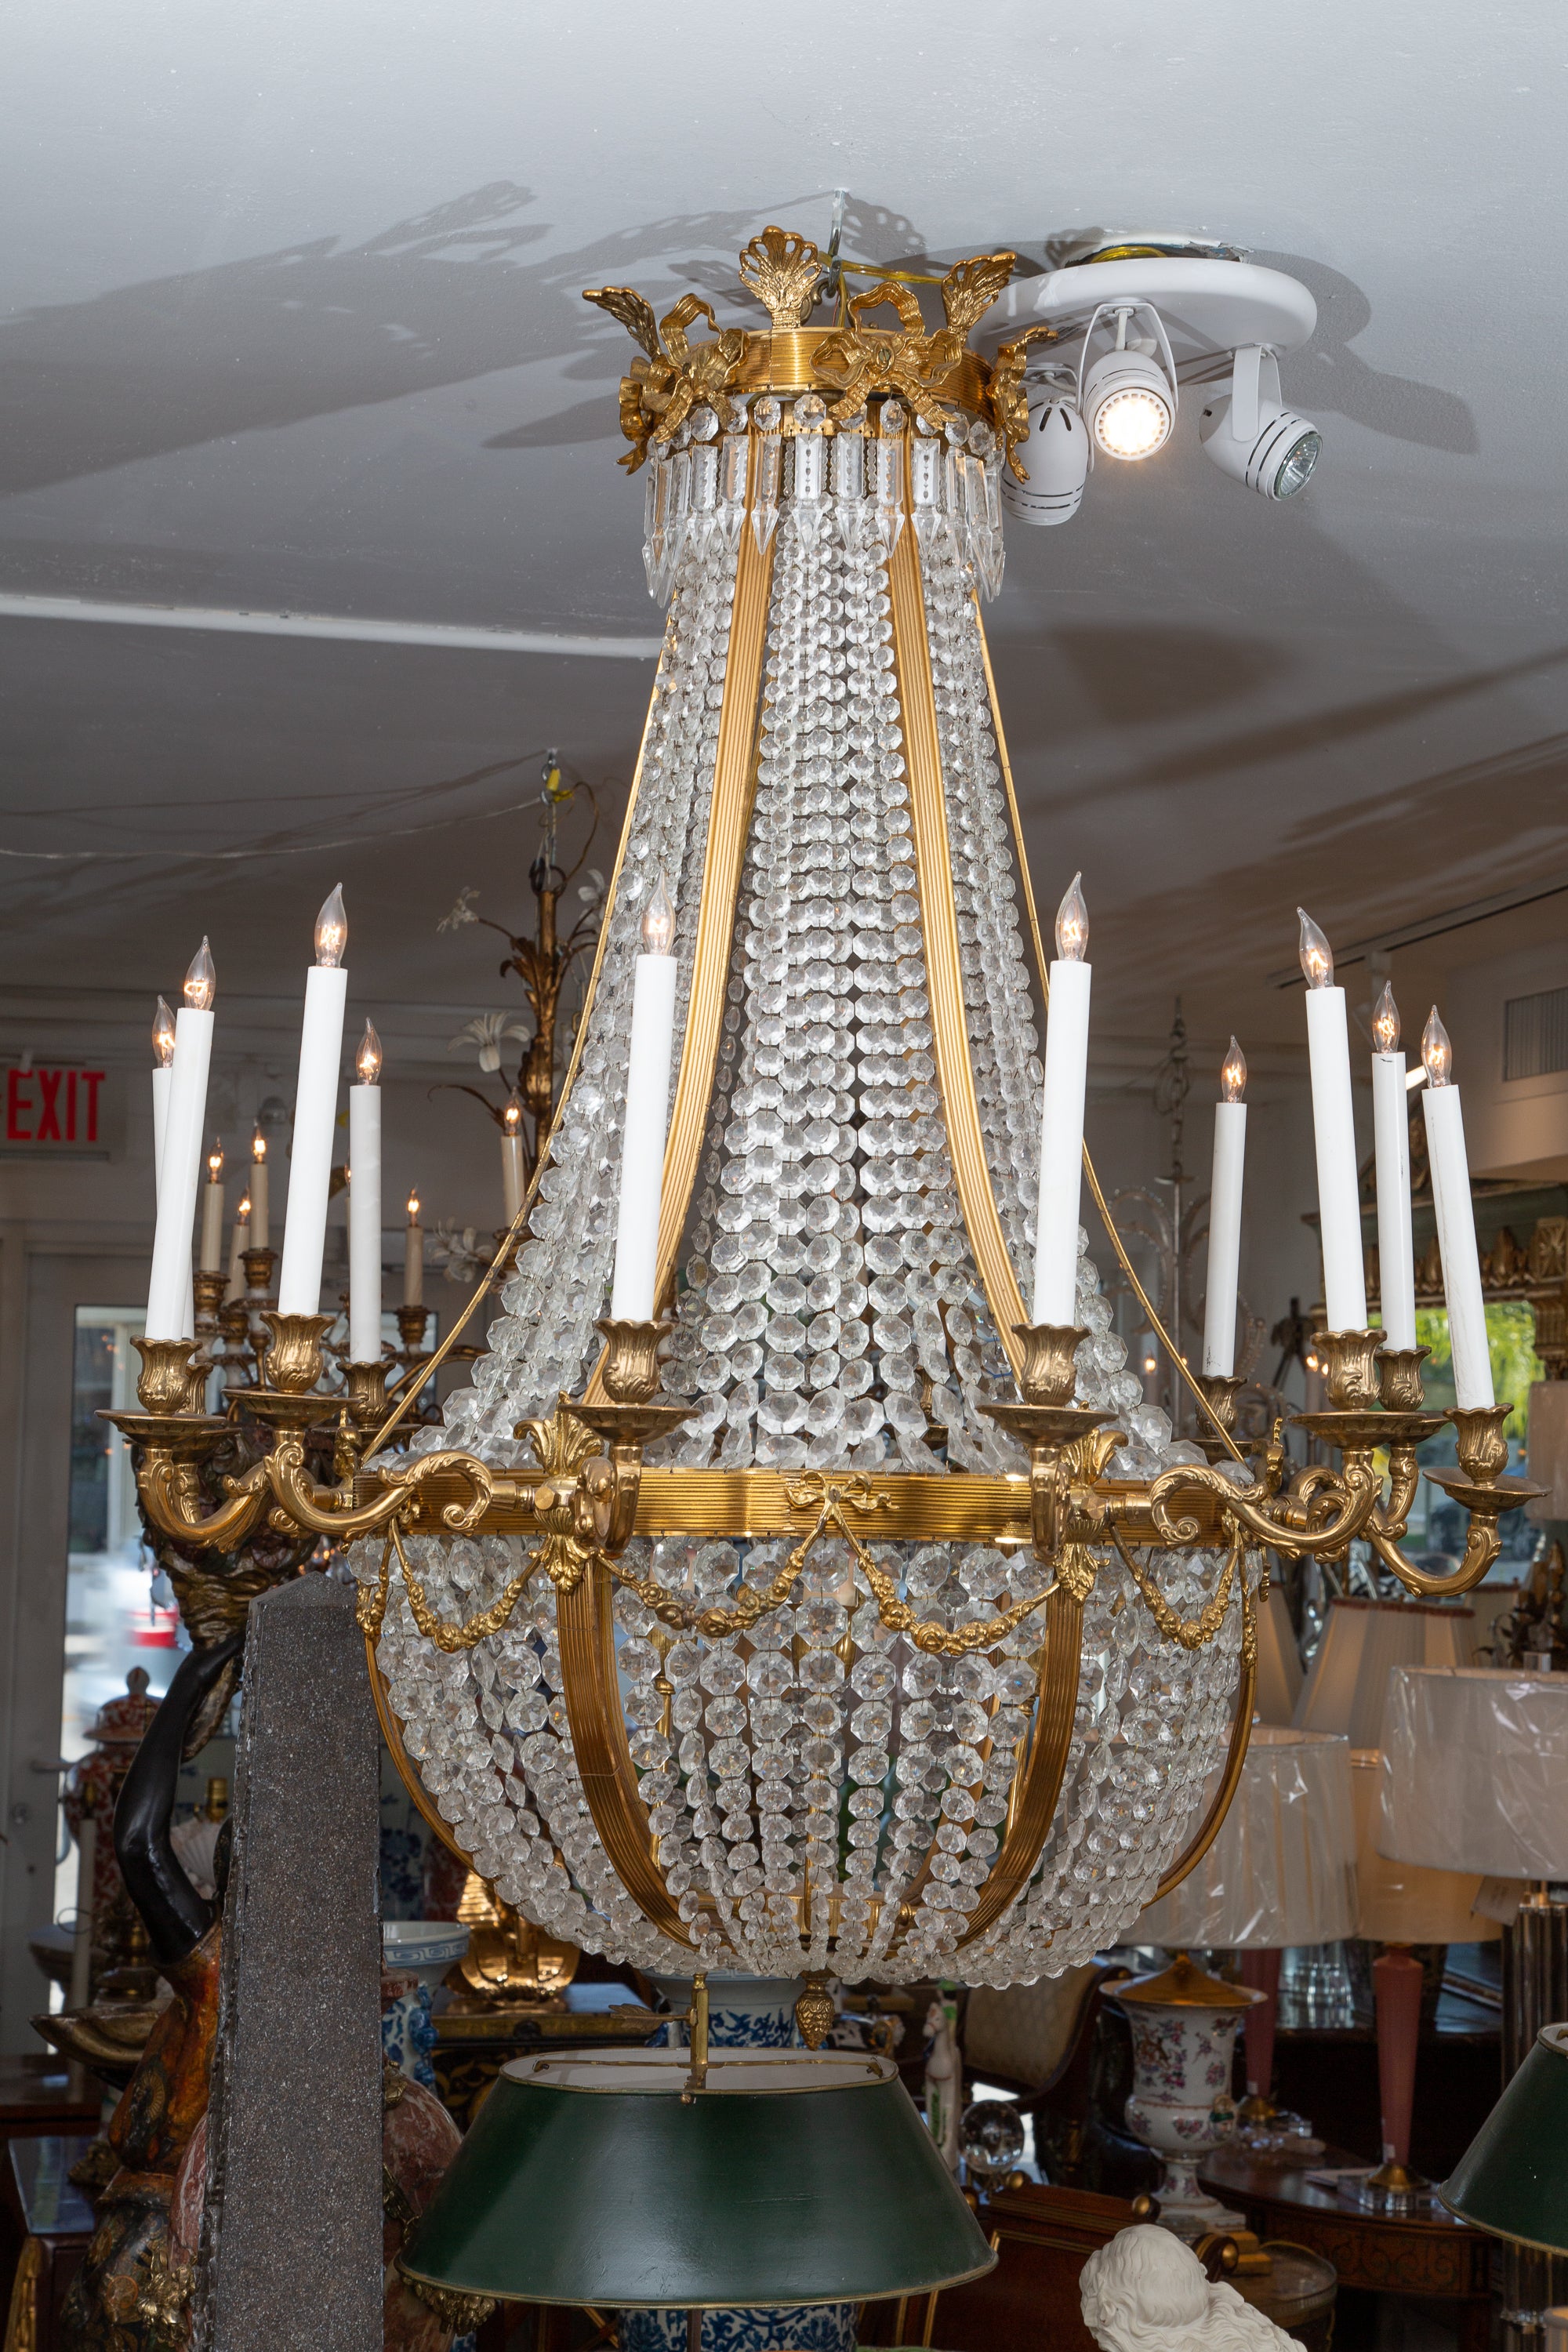 This is a classic French Regency style 12-light chandelier with faceted crystal strands cascading in waterfall fashion within a gilt metal frame. The entire structure is enhanced by bows and swags. Three additional lights on arms in the center